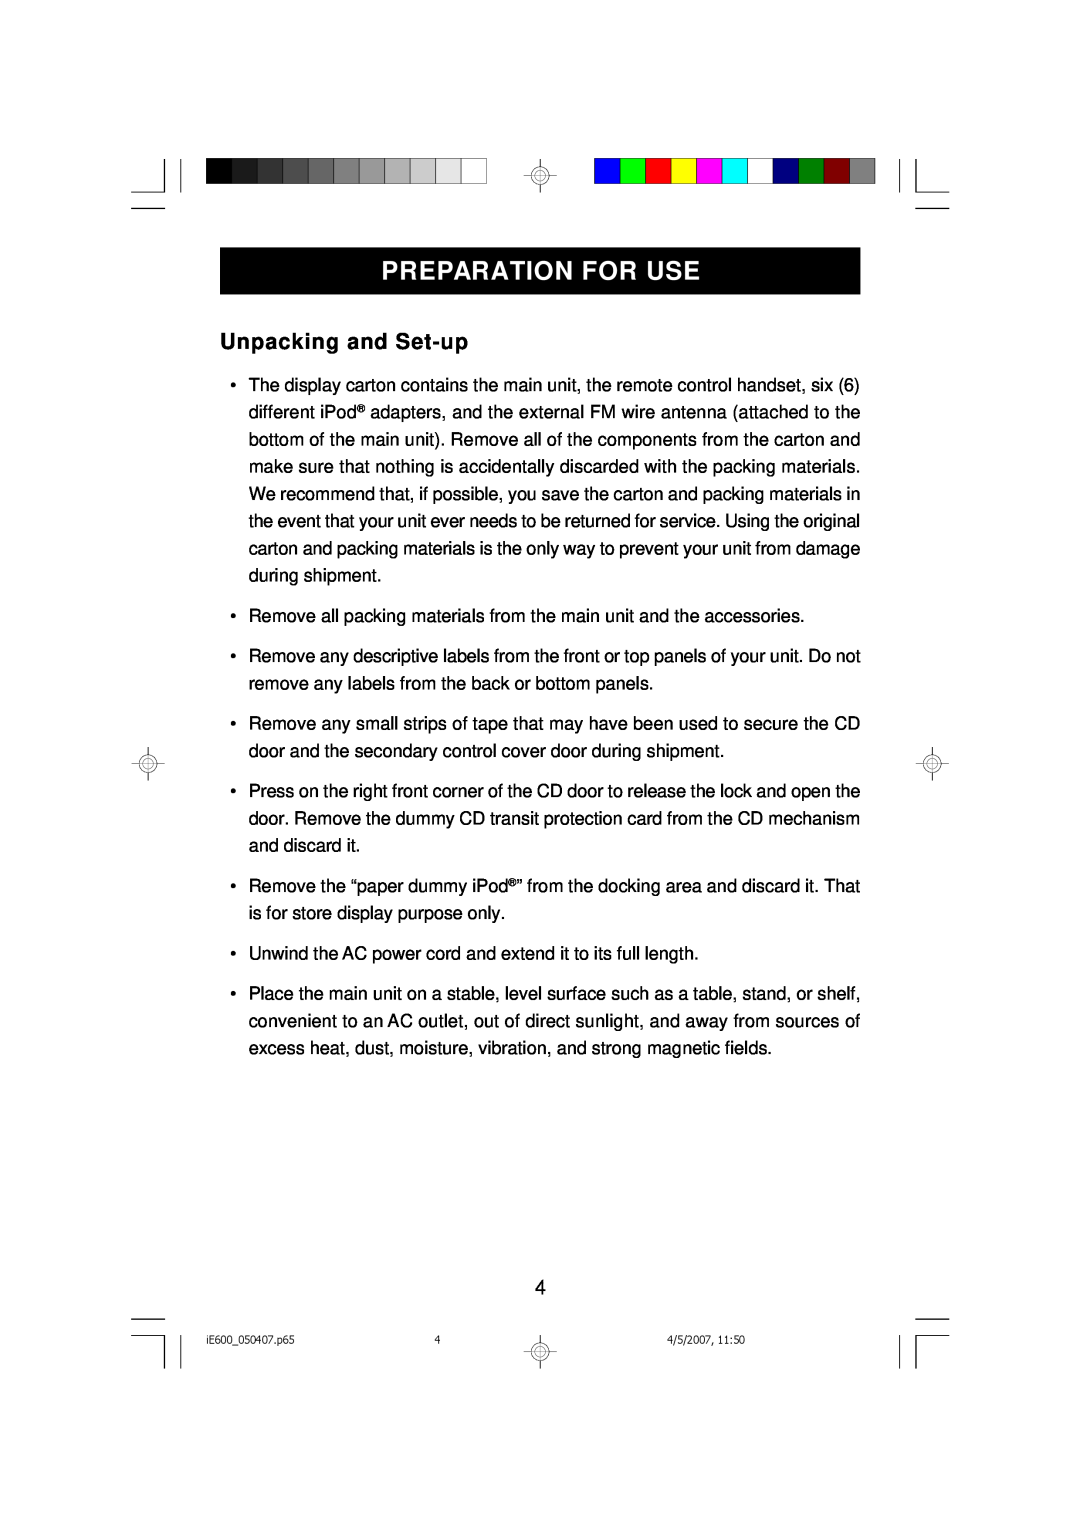 Emerson iE600 owner manual Preparation For Use, Unpacking and Set-up 